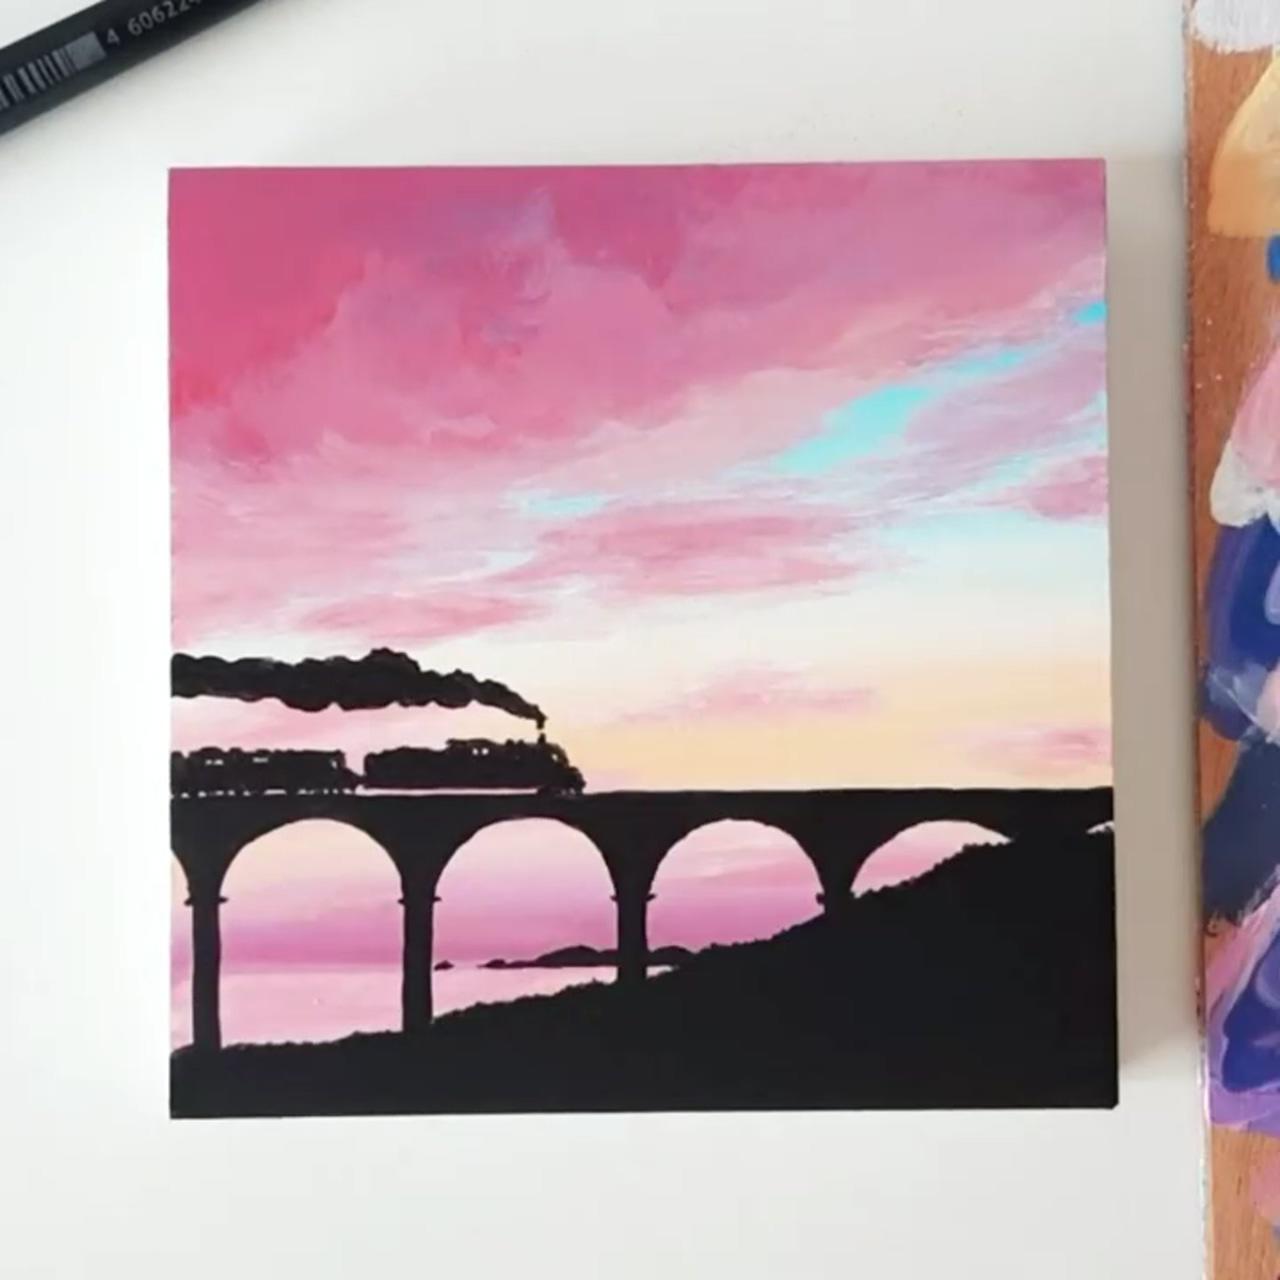 Acrylic painting tutorial on youtube; sunset canvas painting